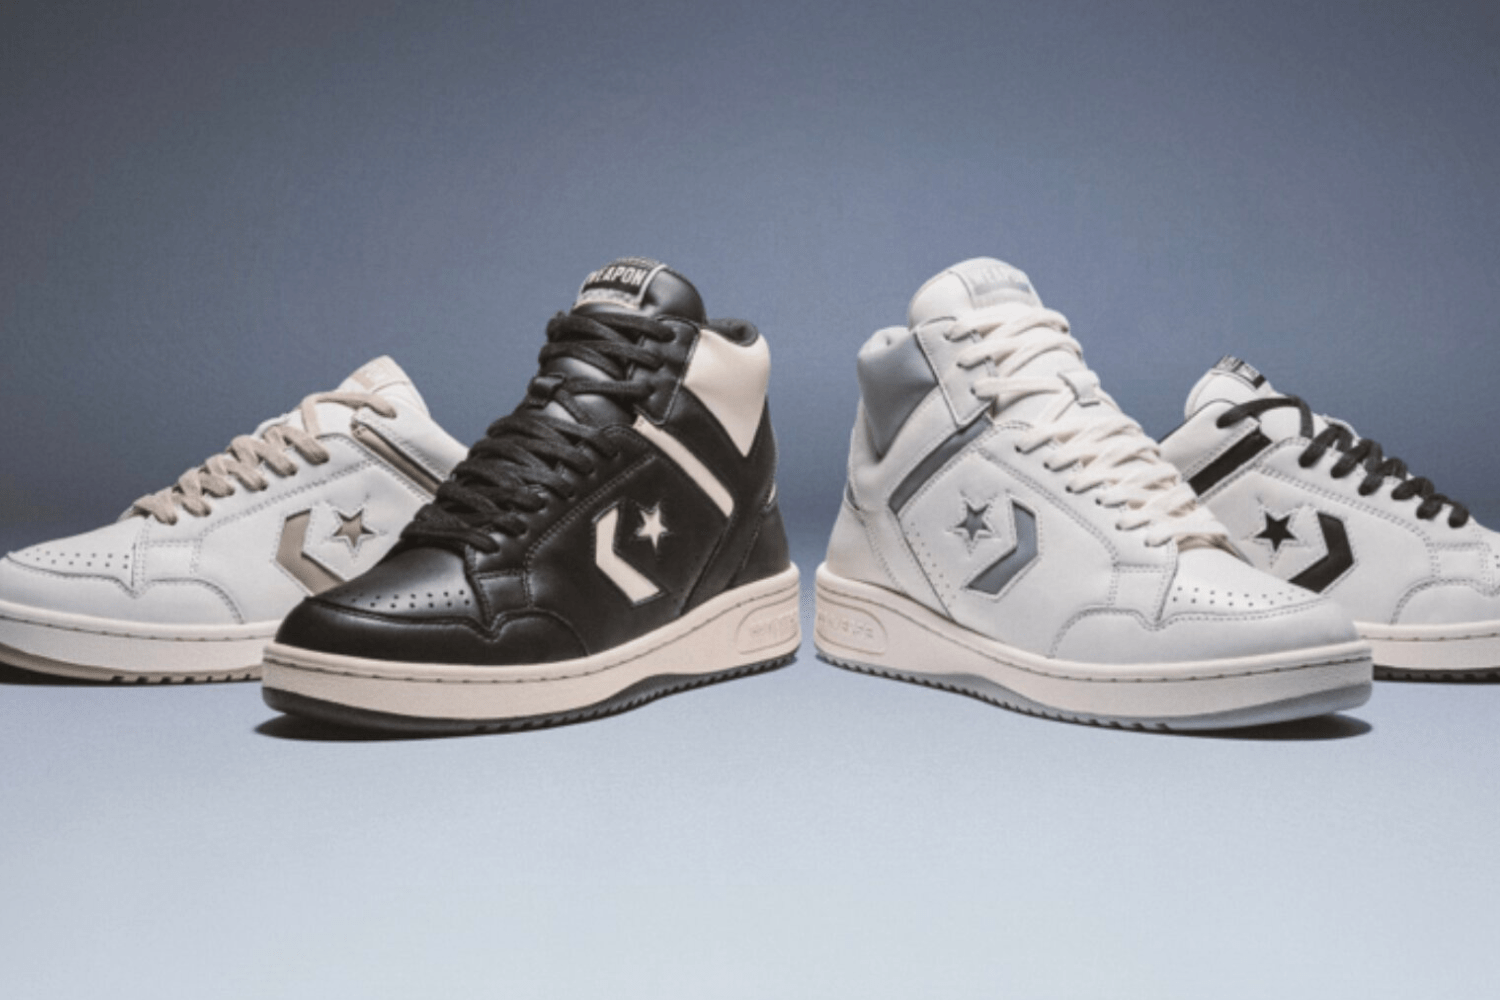 The Converse Weapon appears in four vintage colorways